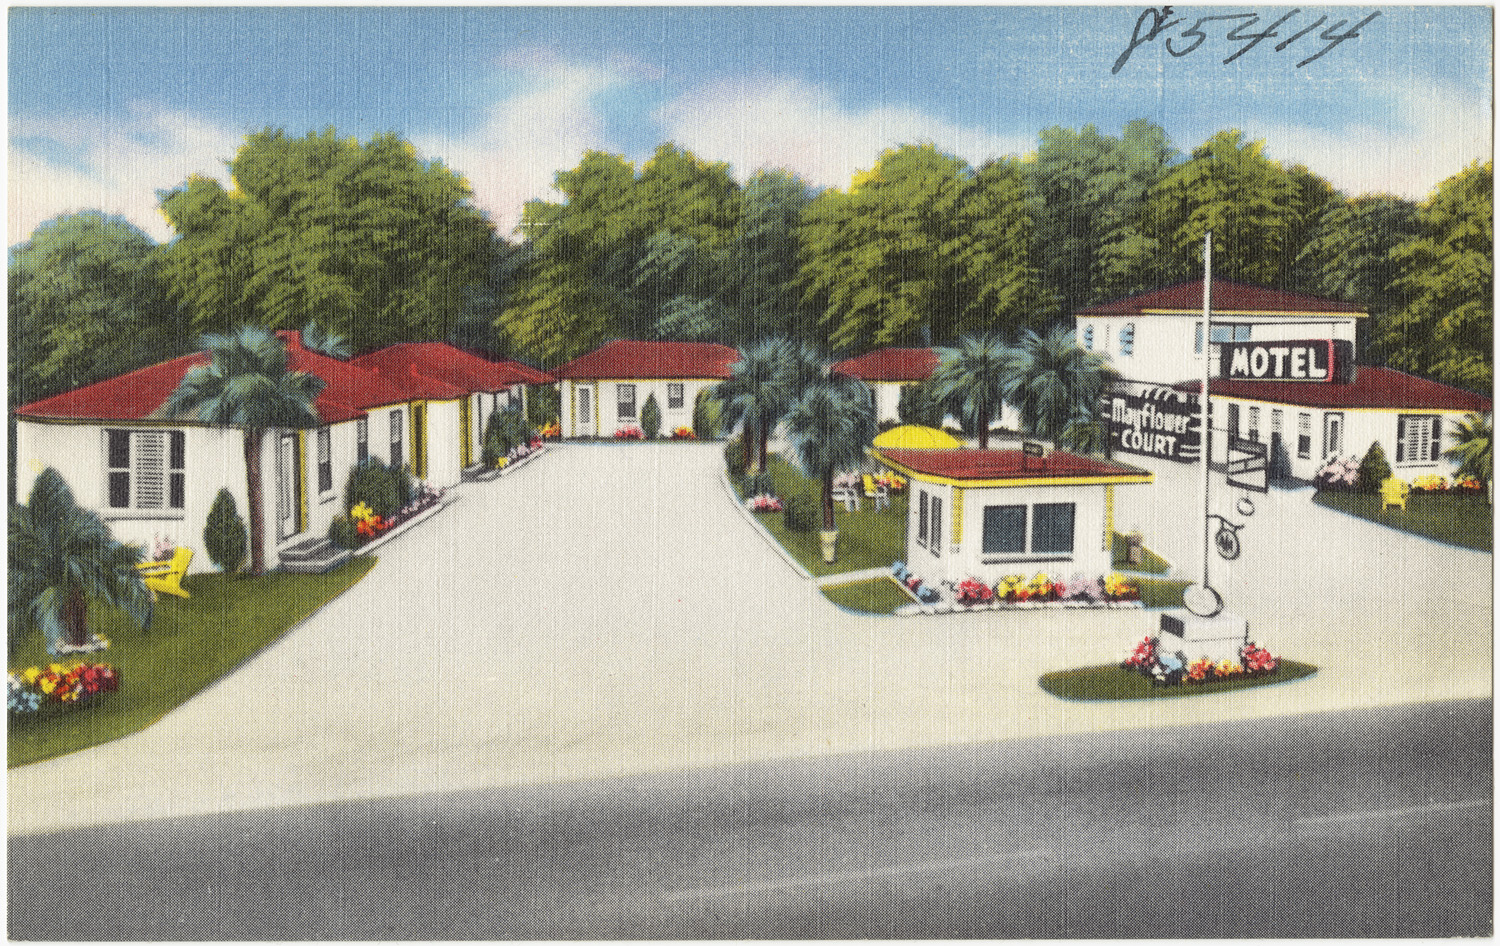 this is an old postcard depicting the front of a motel